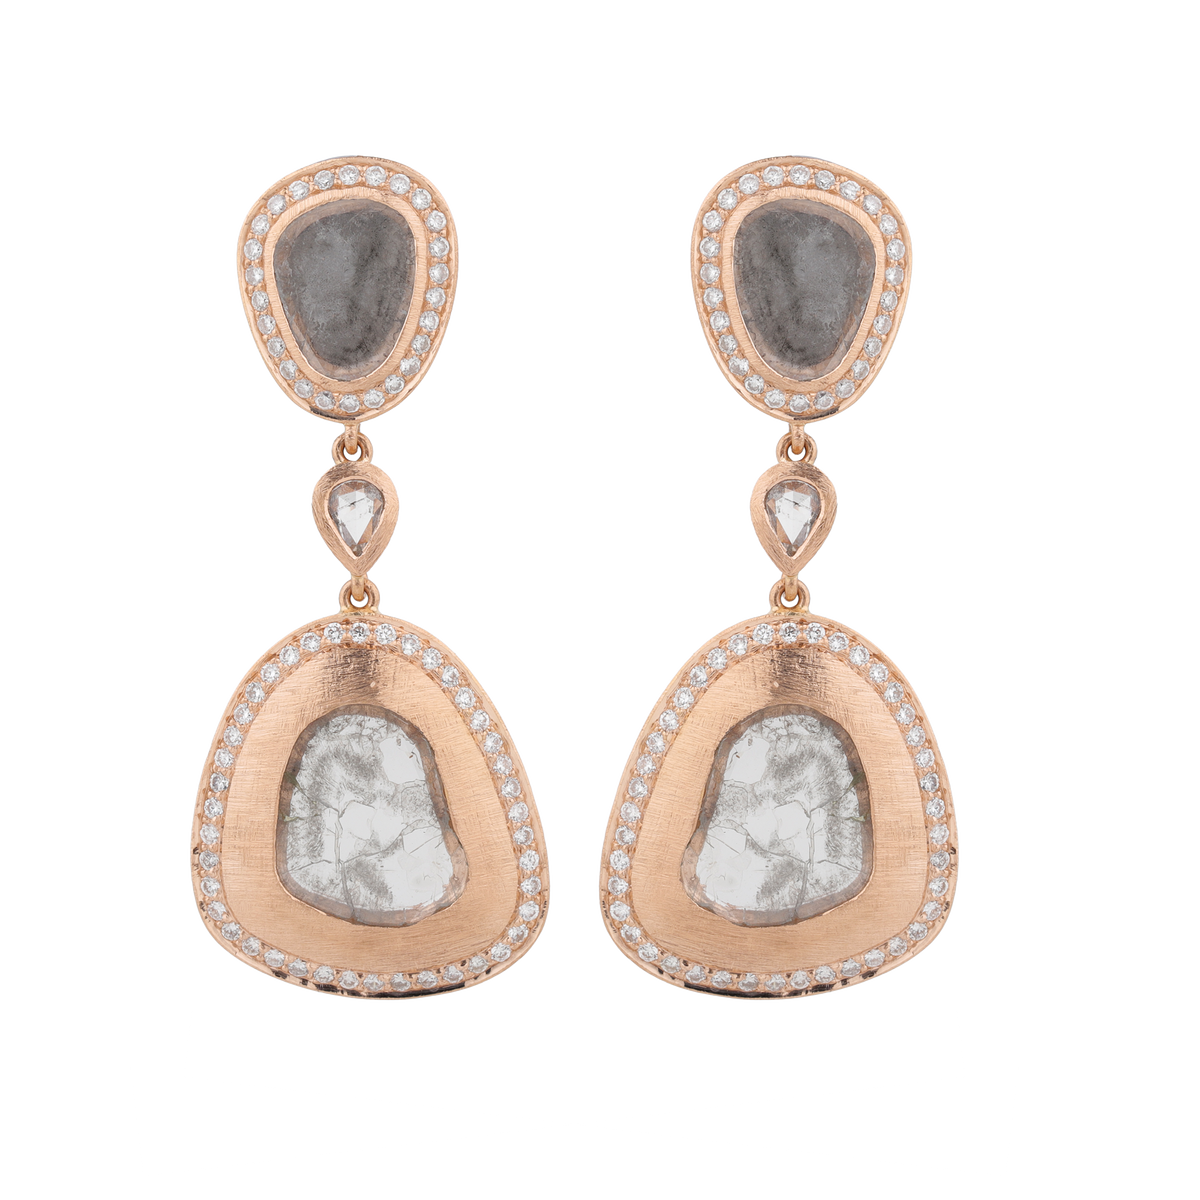 Earrings made of 750 rose gold with diamond disc